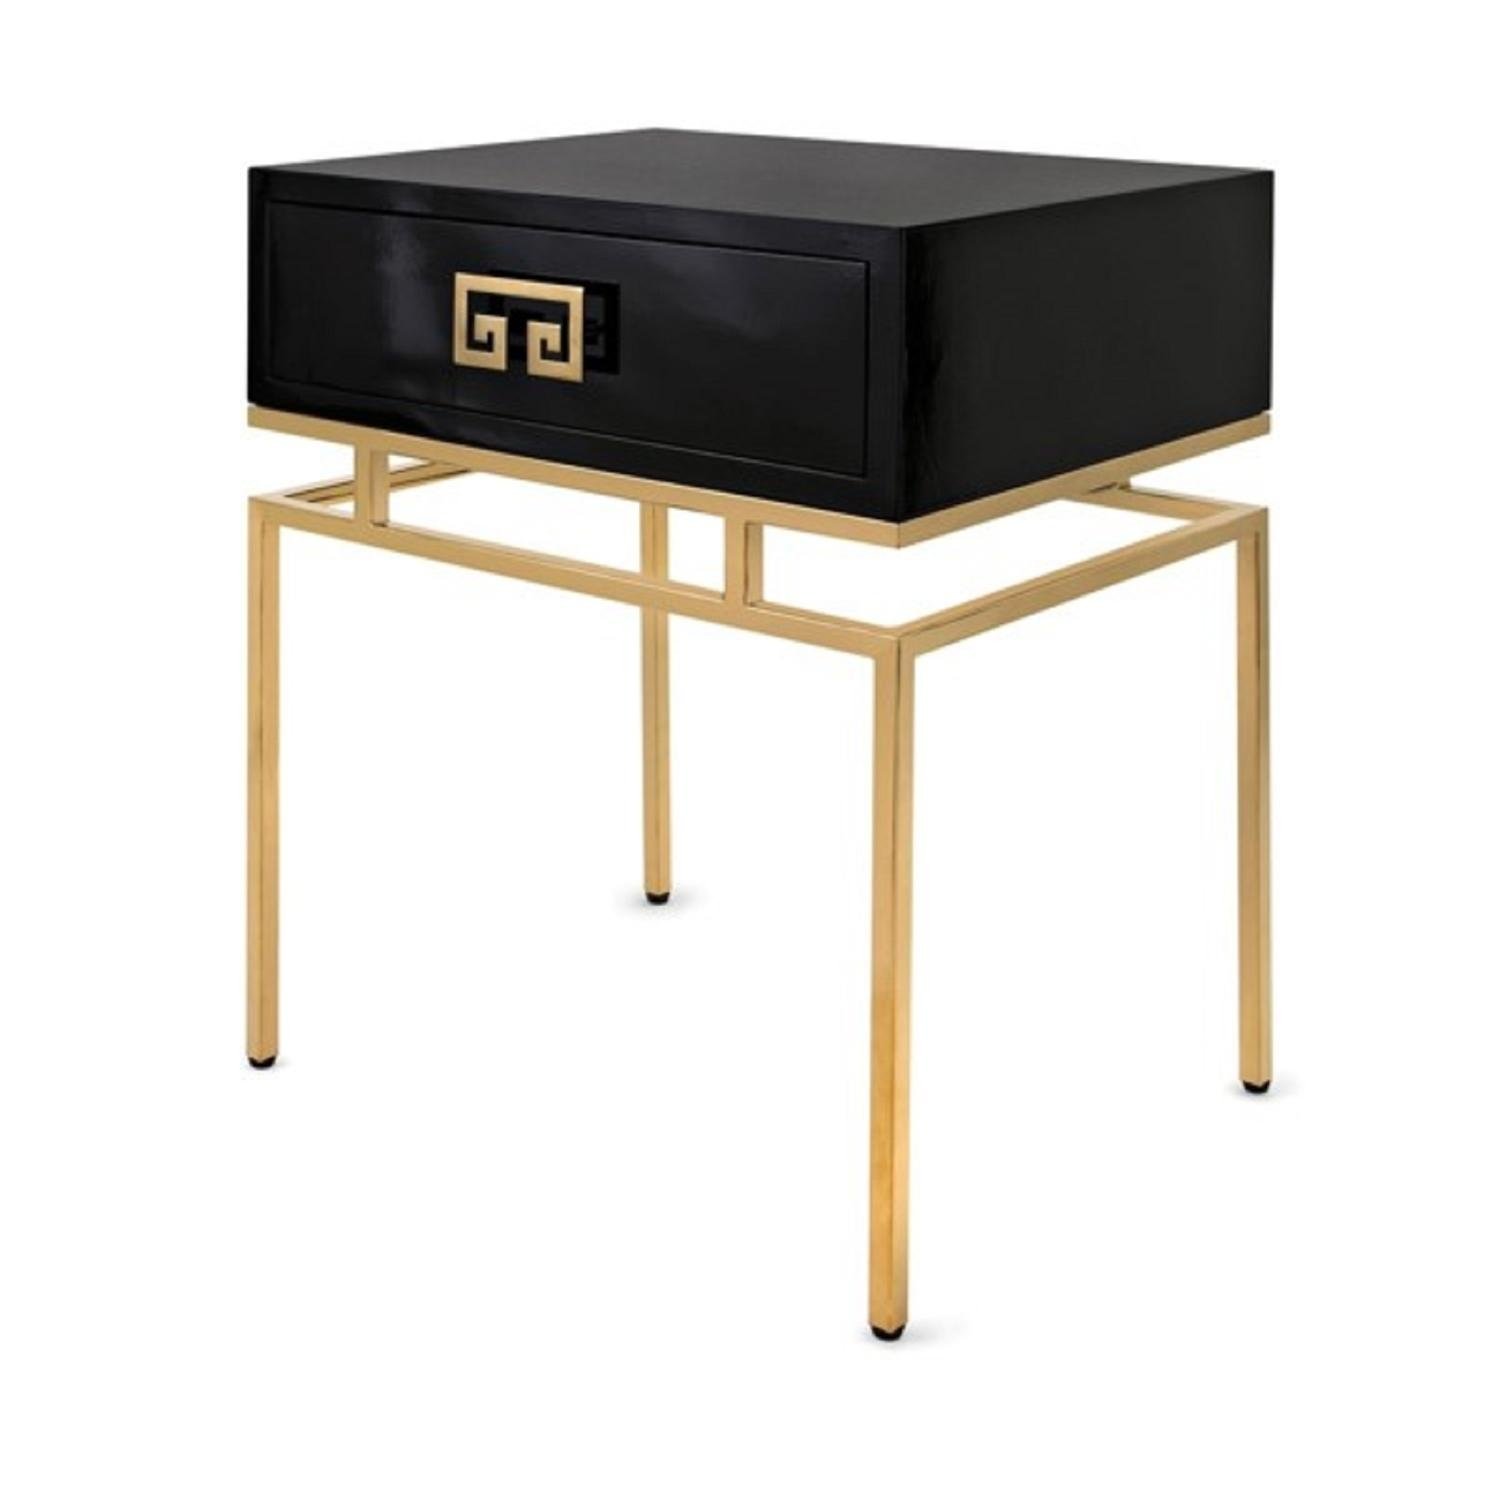 black decorative rectangular accent table with gold colored legs metal sylvia free shipping today indoor nautical ceiling lights bedside chest drawers red round cover white cloth